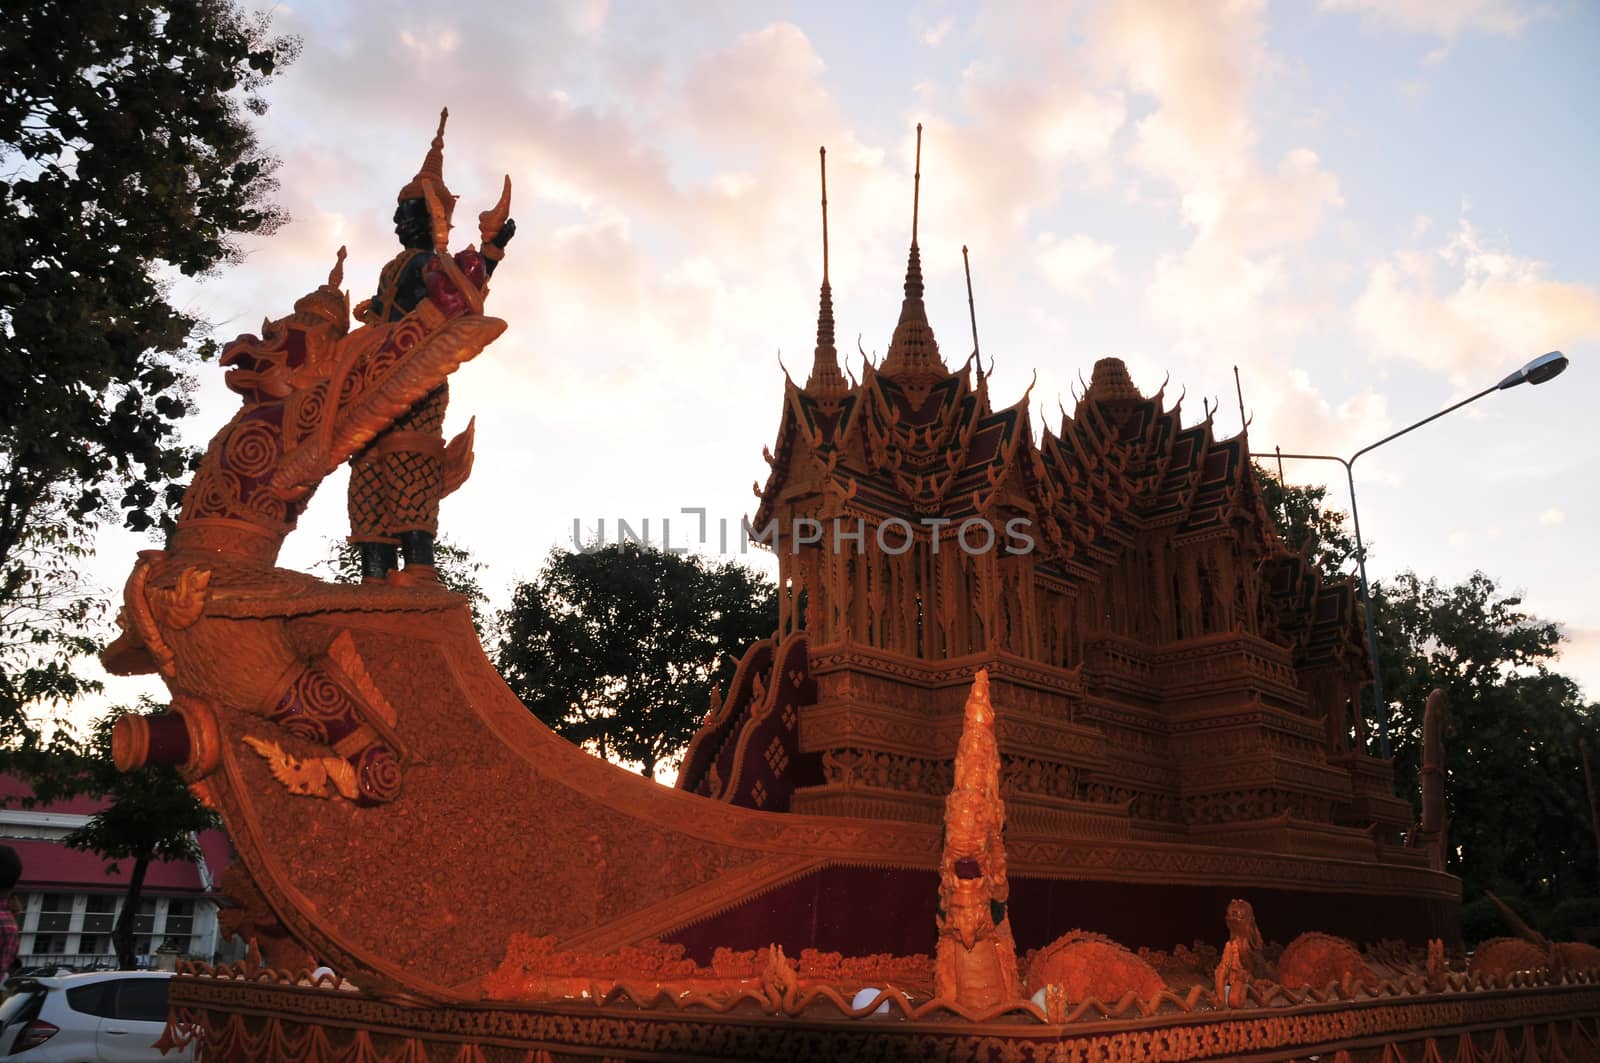 Sakon nakhon ,Thailand – October 23,2018 : Wax Castle Festival is held annually at the end of the Buddhist Lent. The event are objective to pay homage to Phra That Choeng Chum